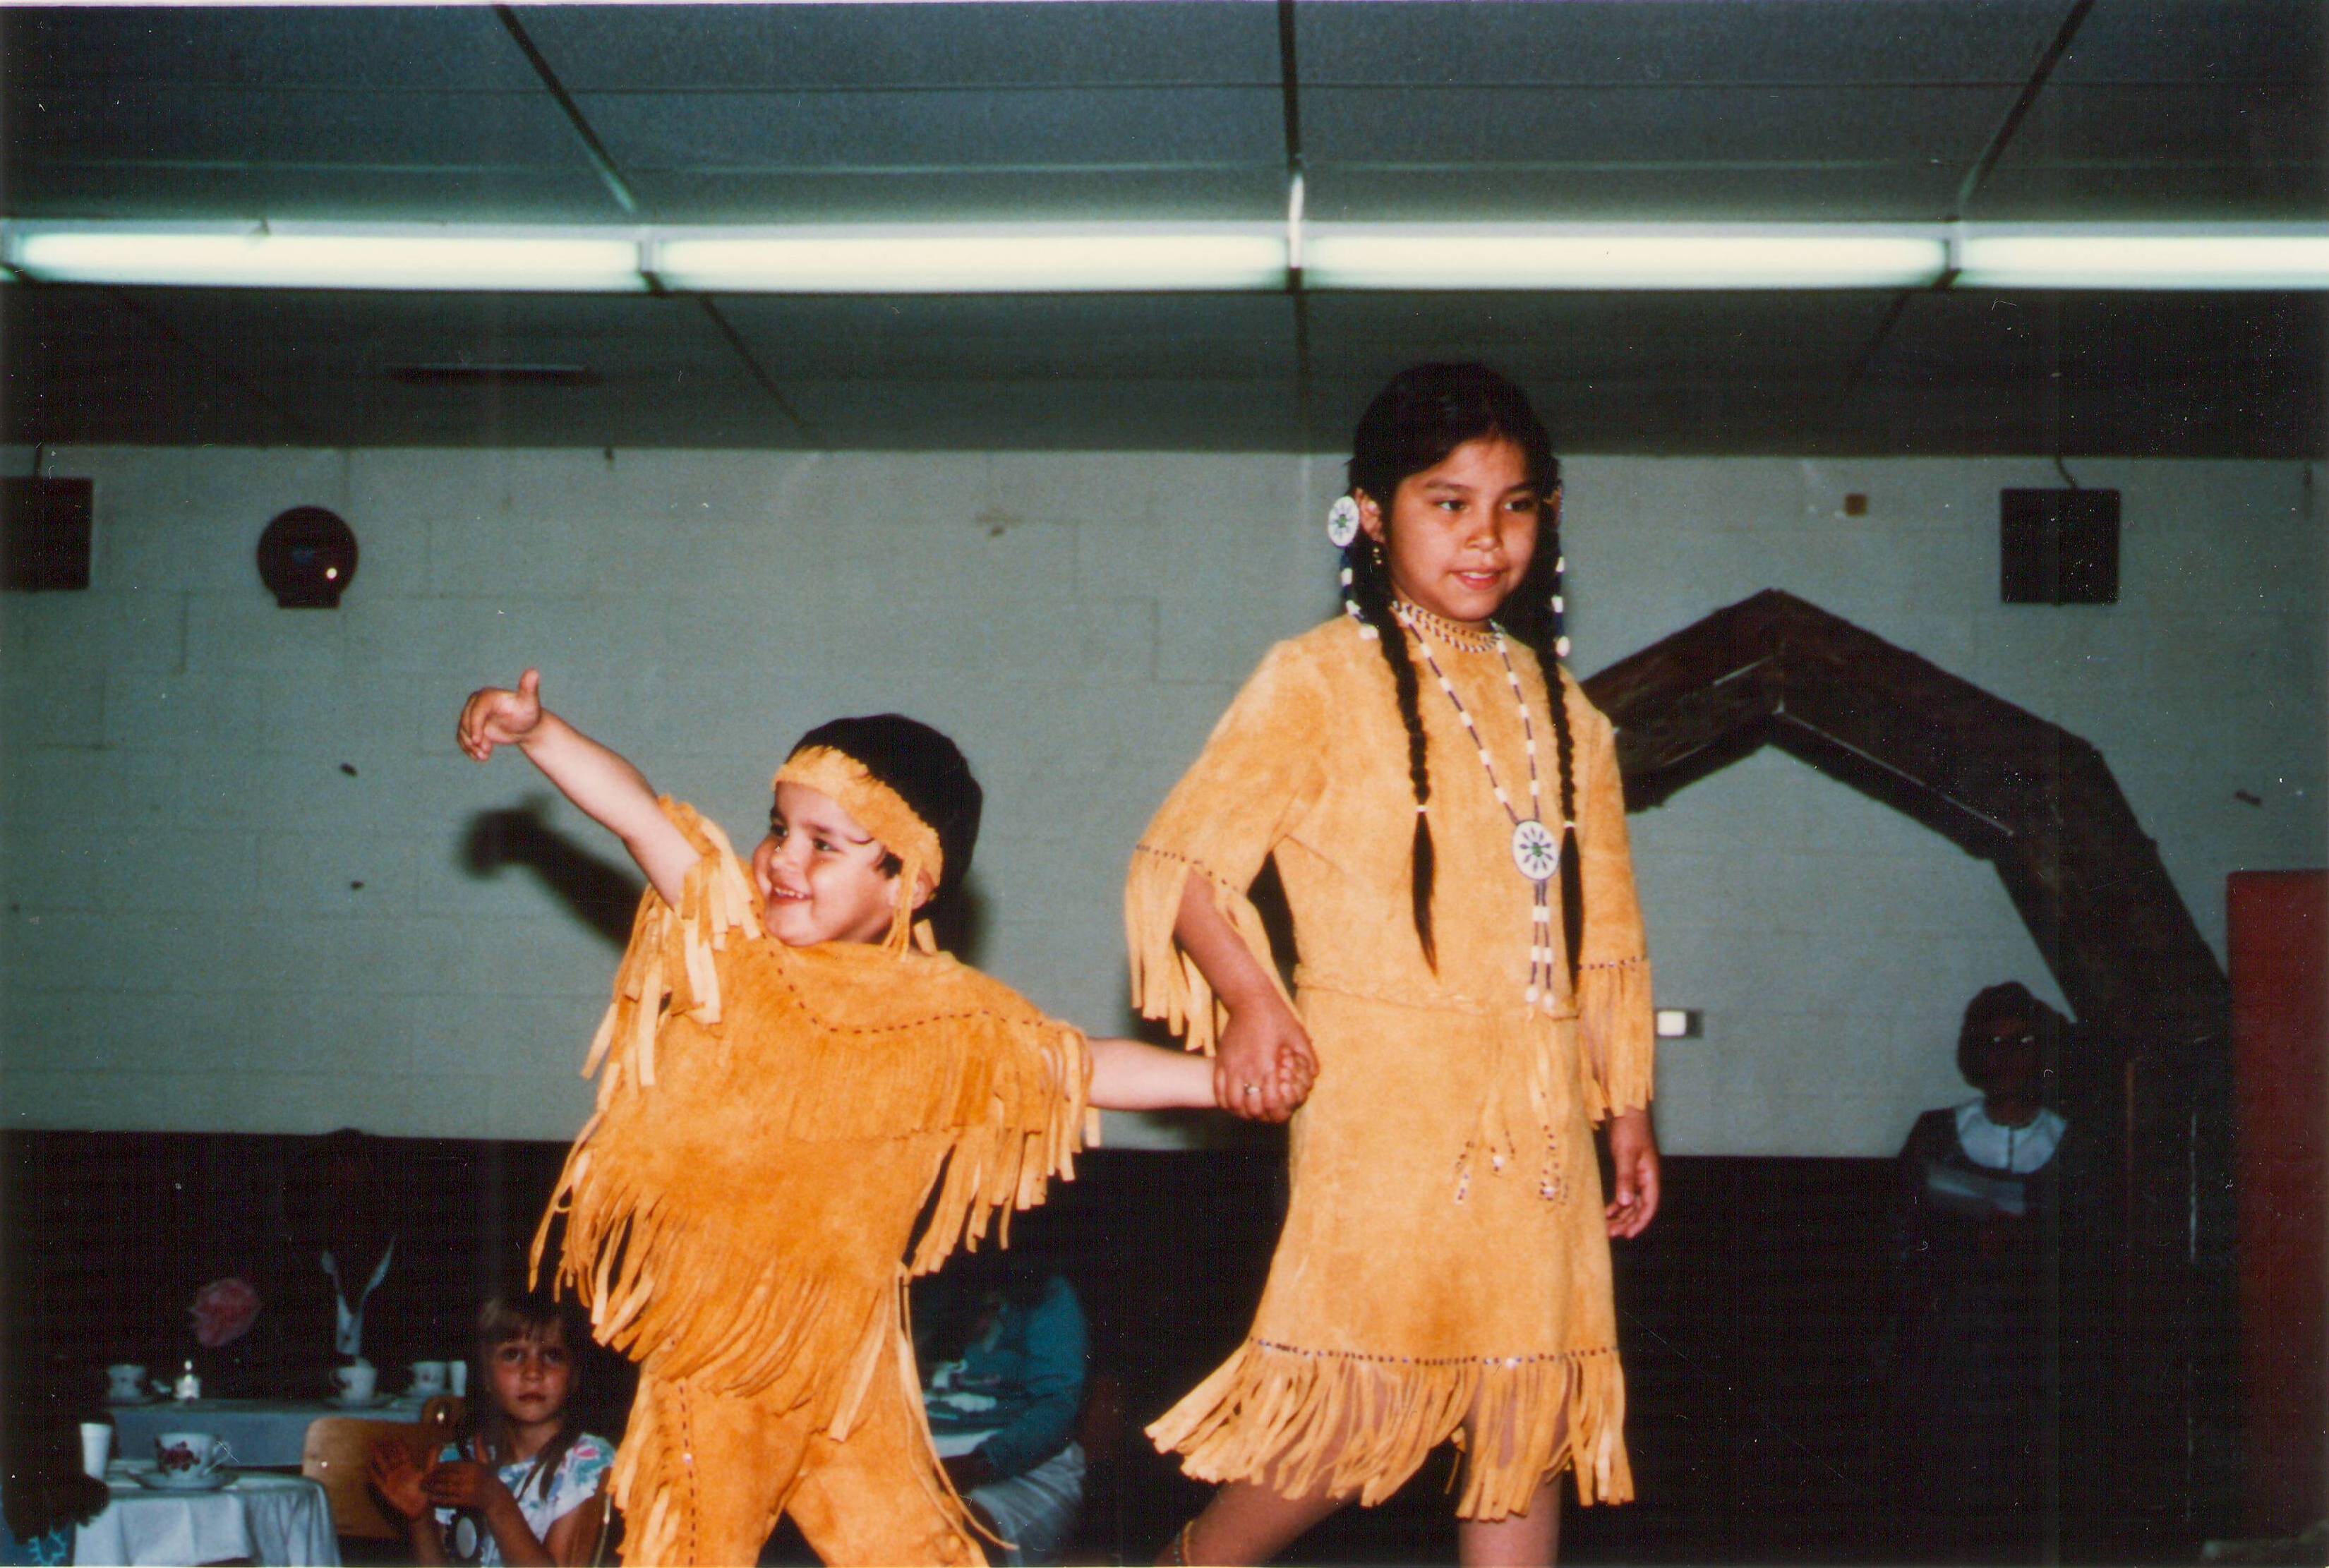 Anyone recognize these two cuties? They are walking the runway at the fashion show for the 1988 Bicentennial Celebrations! The show consisted of many beautiful traditional outfits and early pioneer clothing styles.
2018.08.536 / Cranna Toews, Marilee.